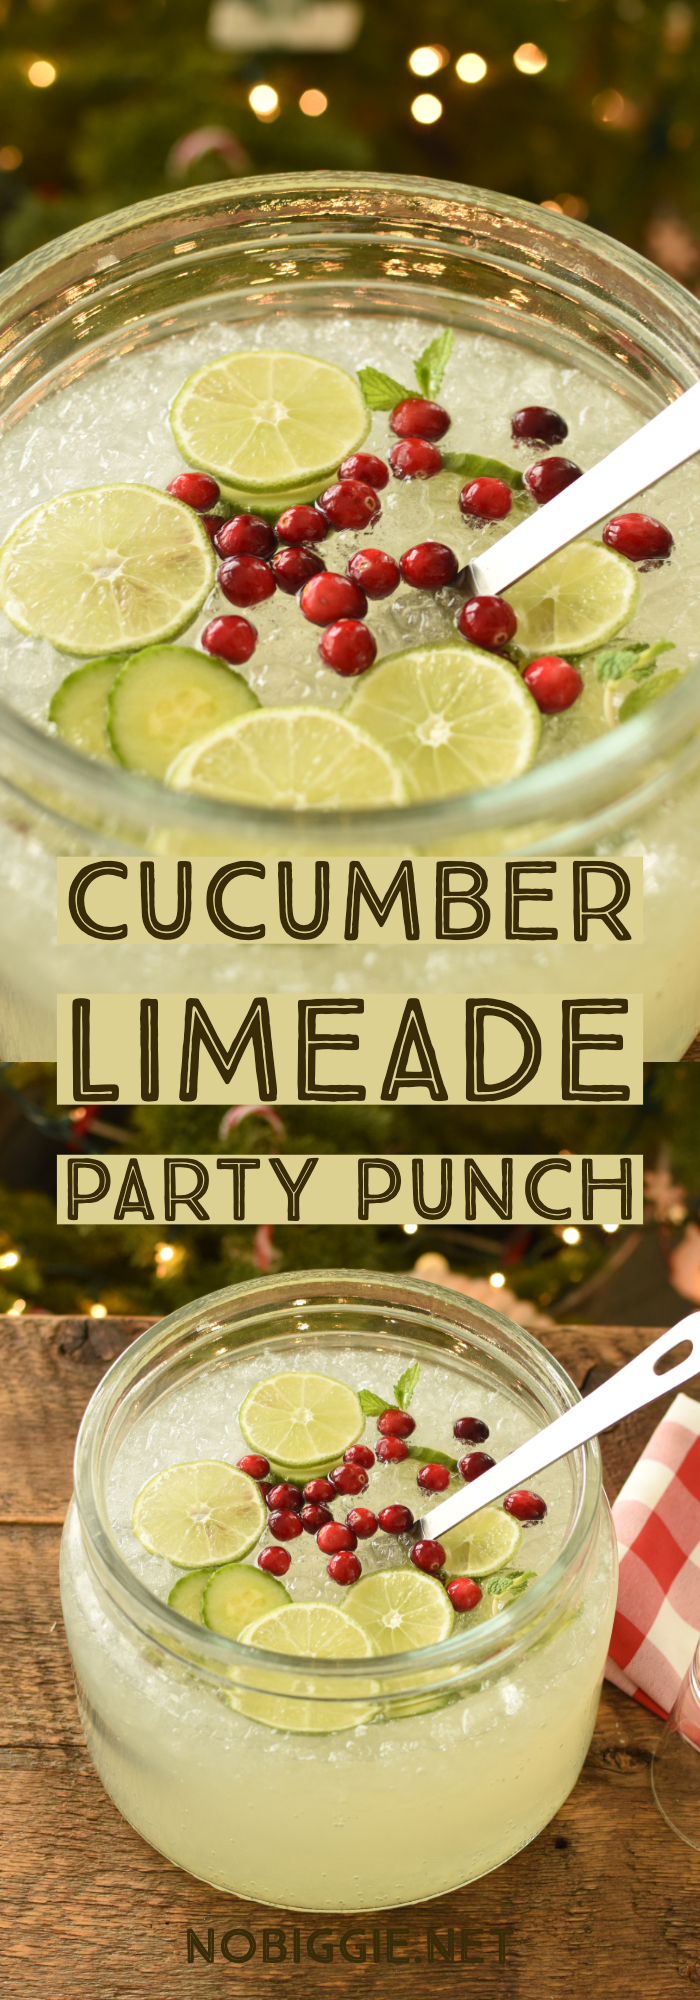 Cucumber Limeade Party Punch